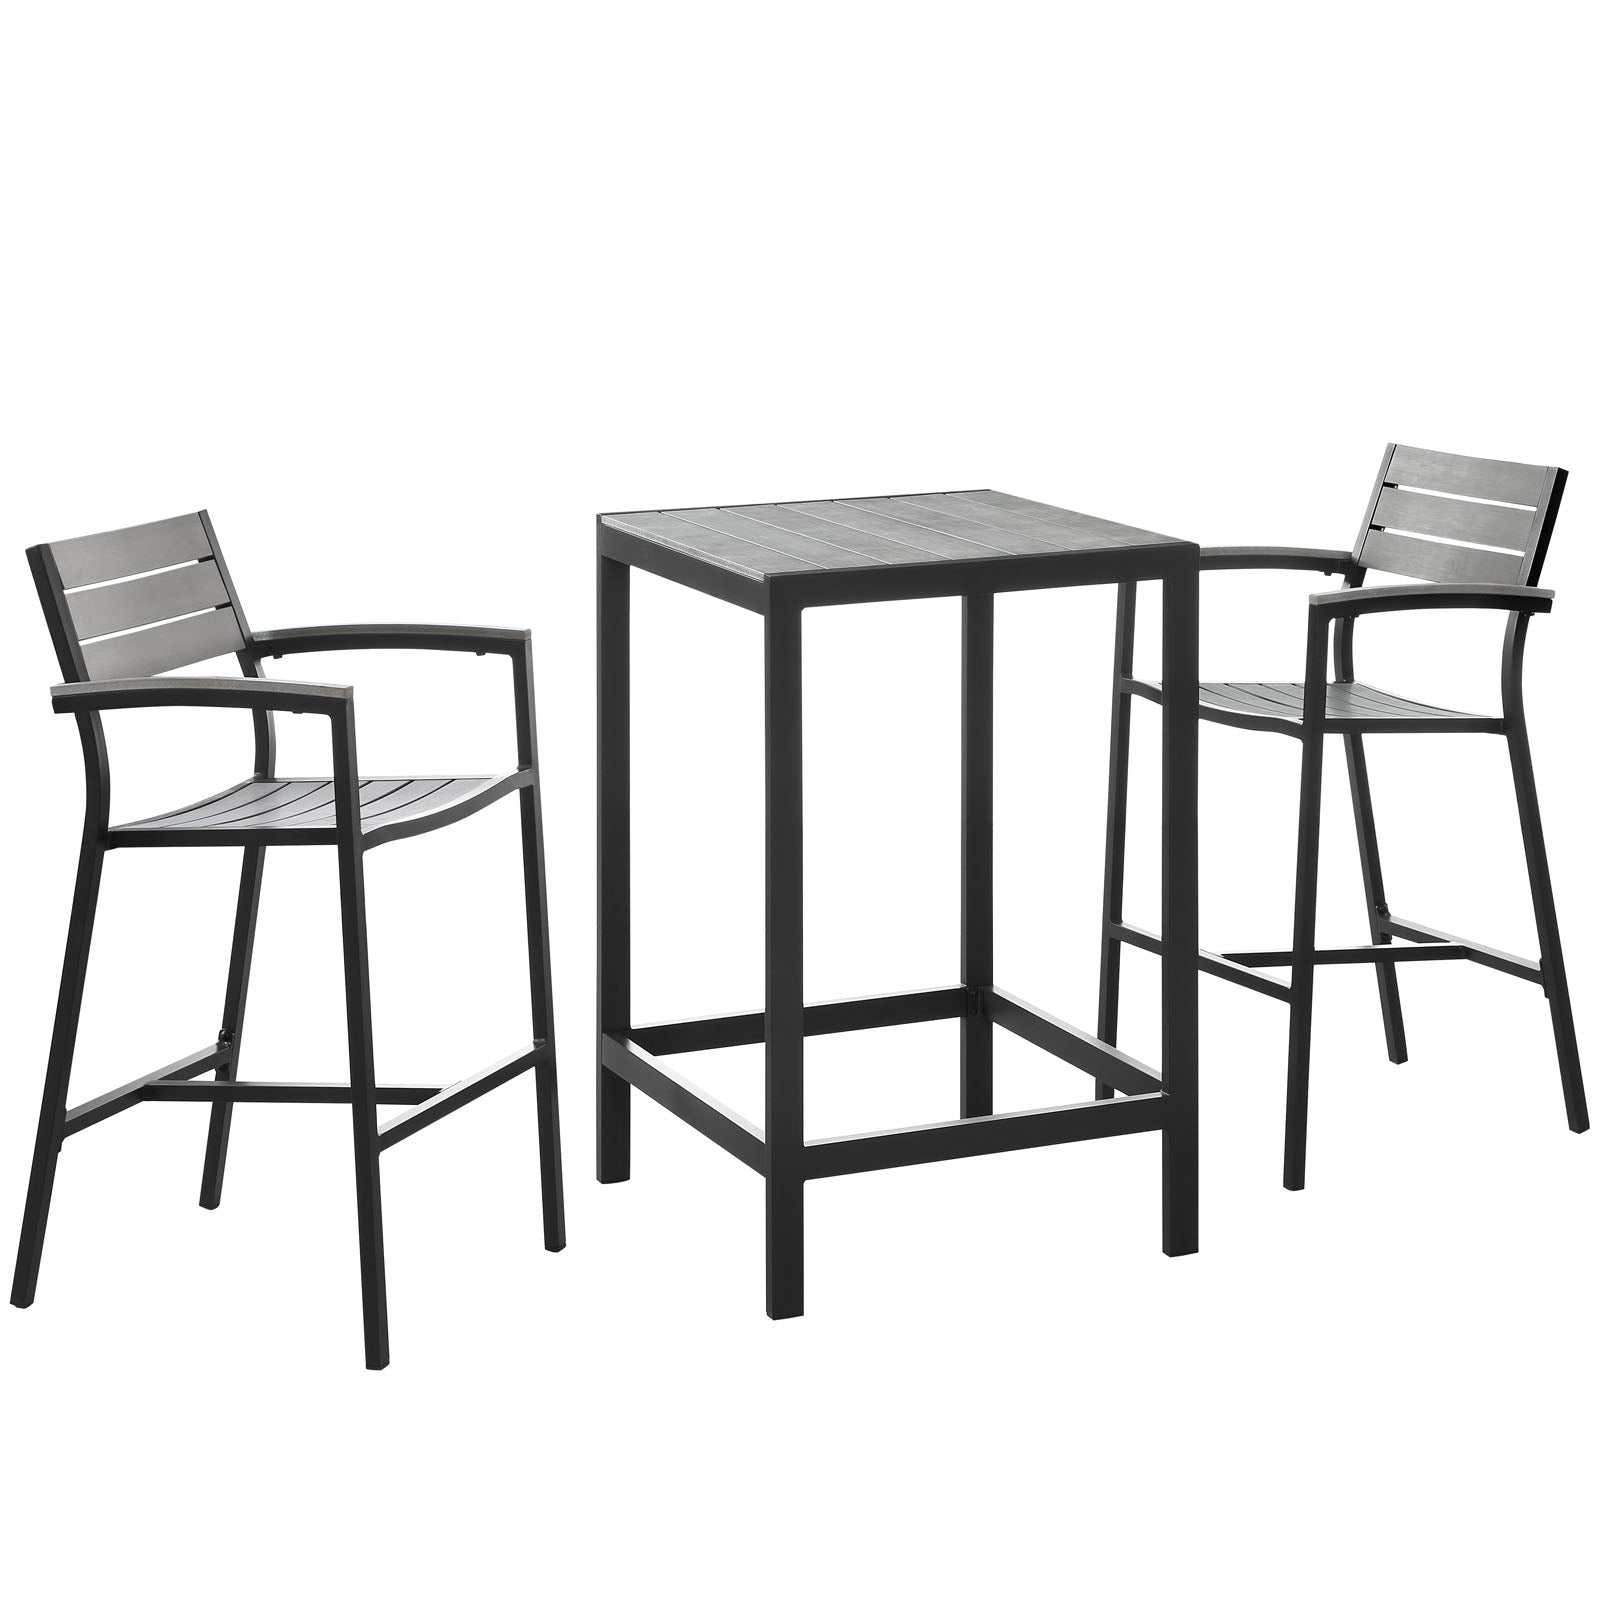 Modway Outdoor Dining Sets - Maine Outdoor Pub Set For 2 Dark Brown & Gray